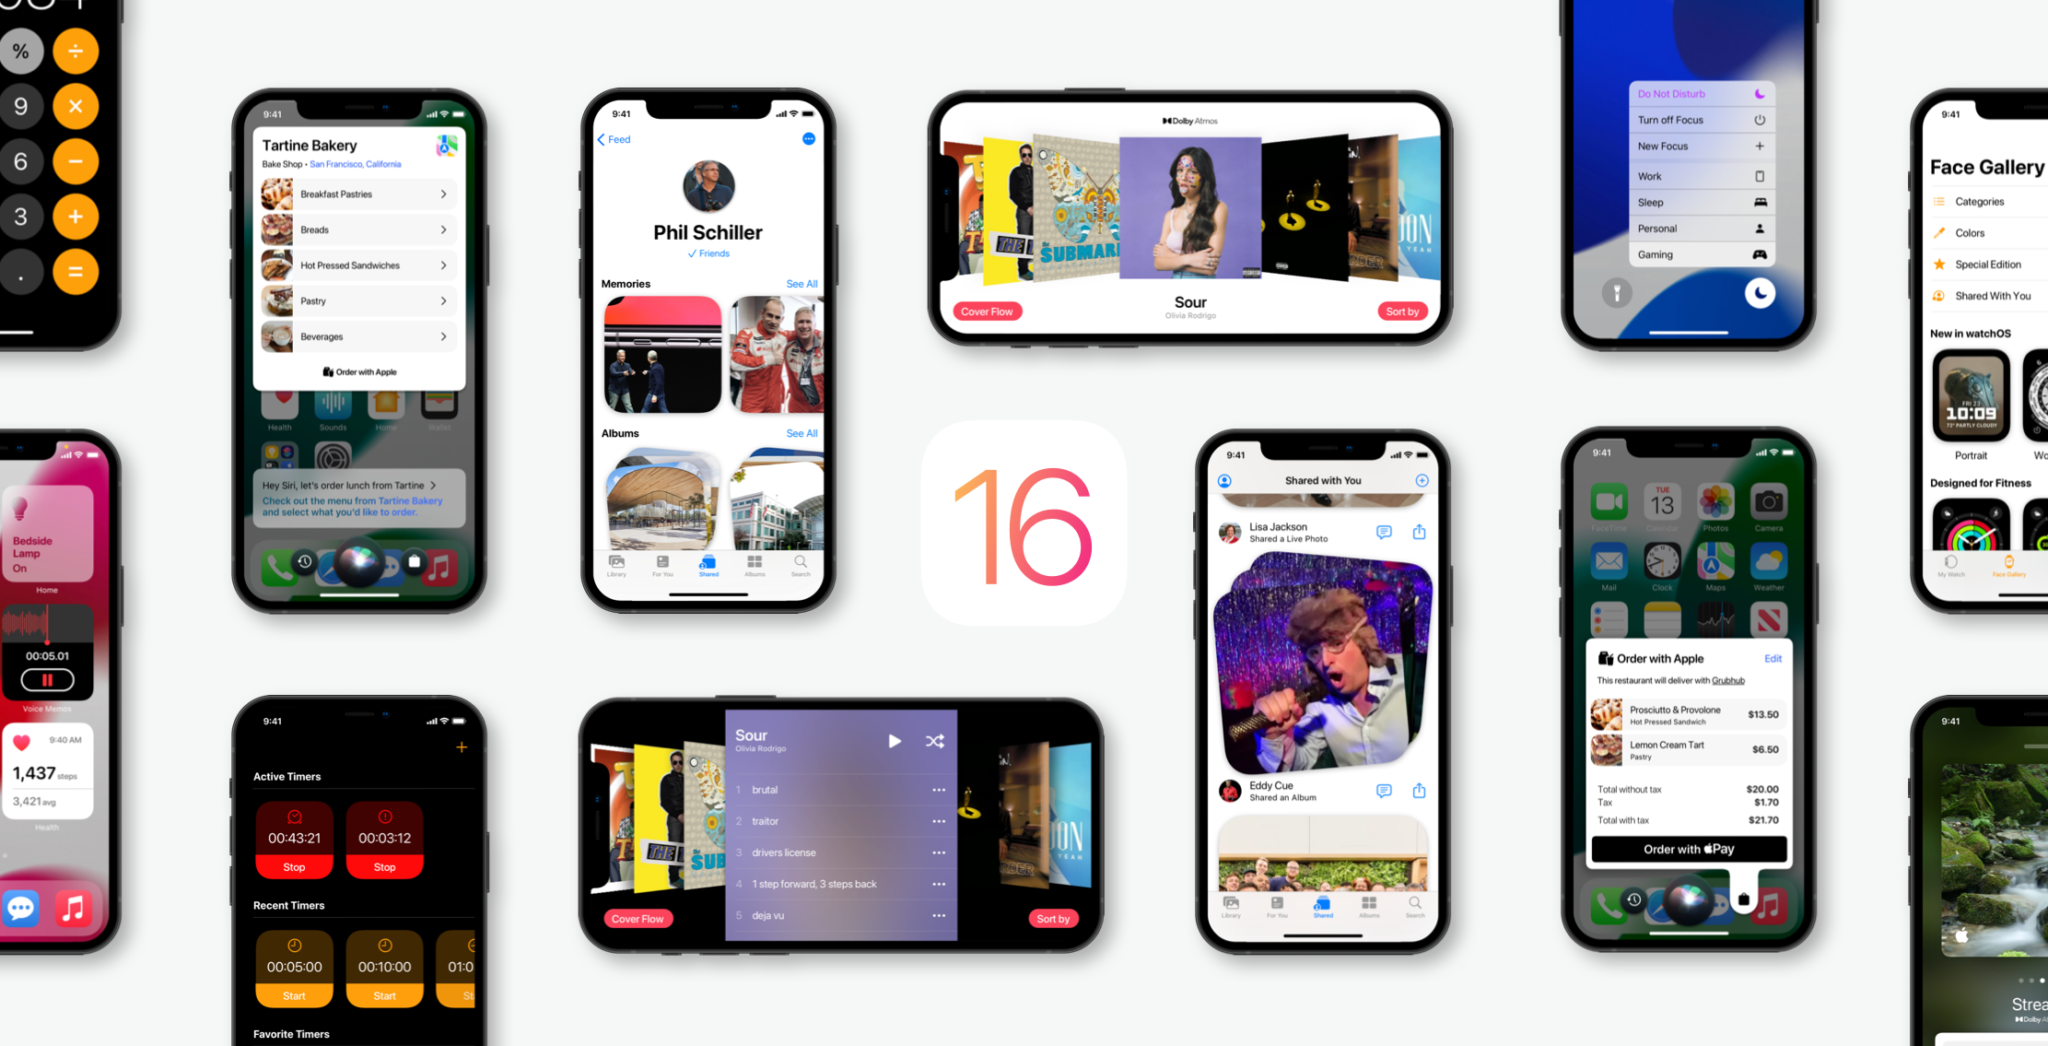 iOS 16 features based on leaks